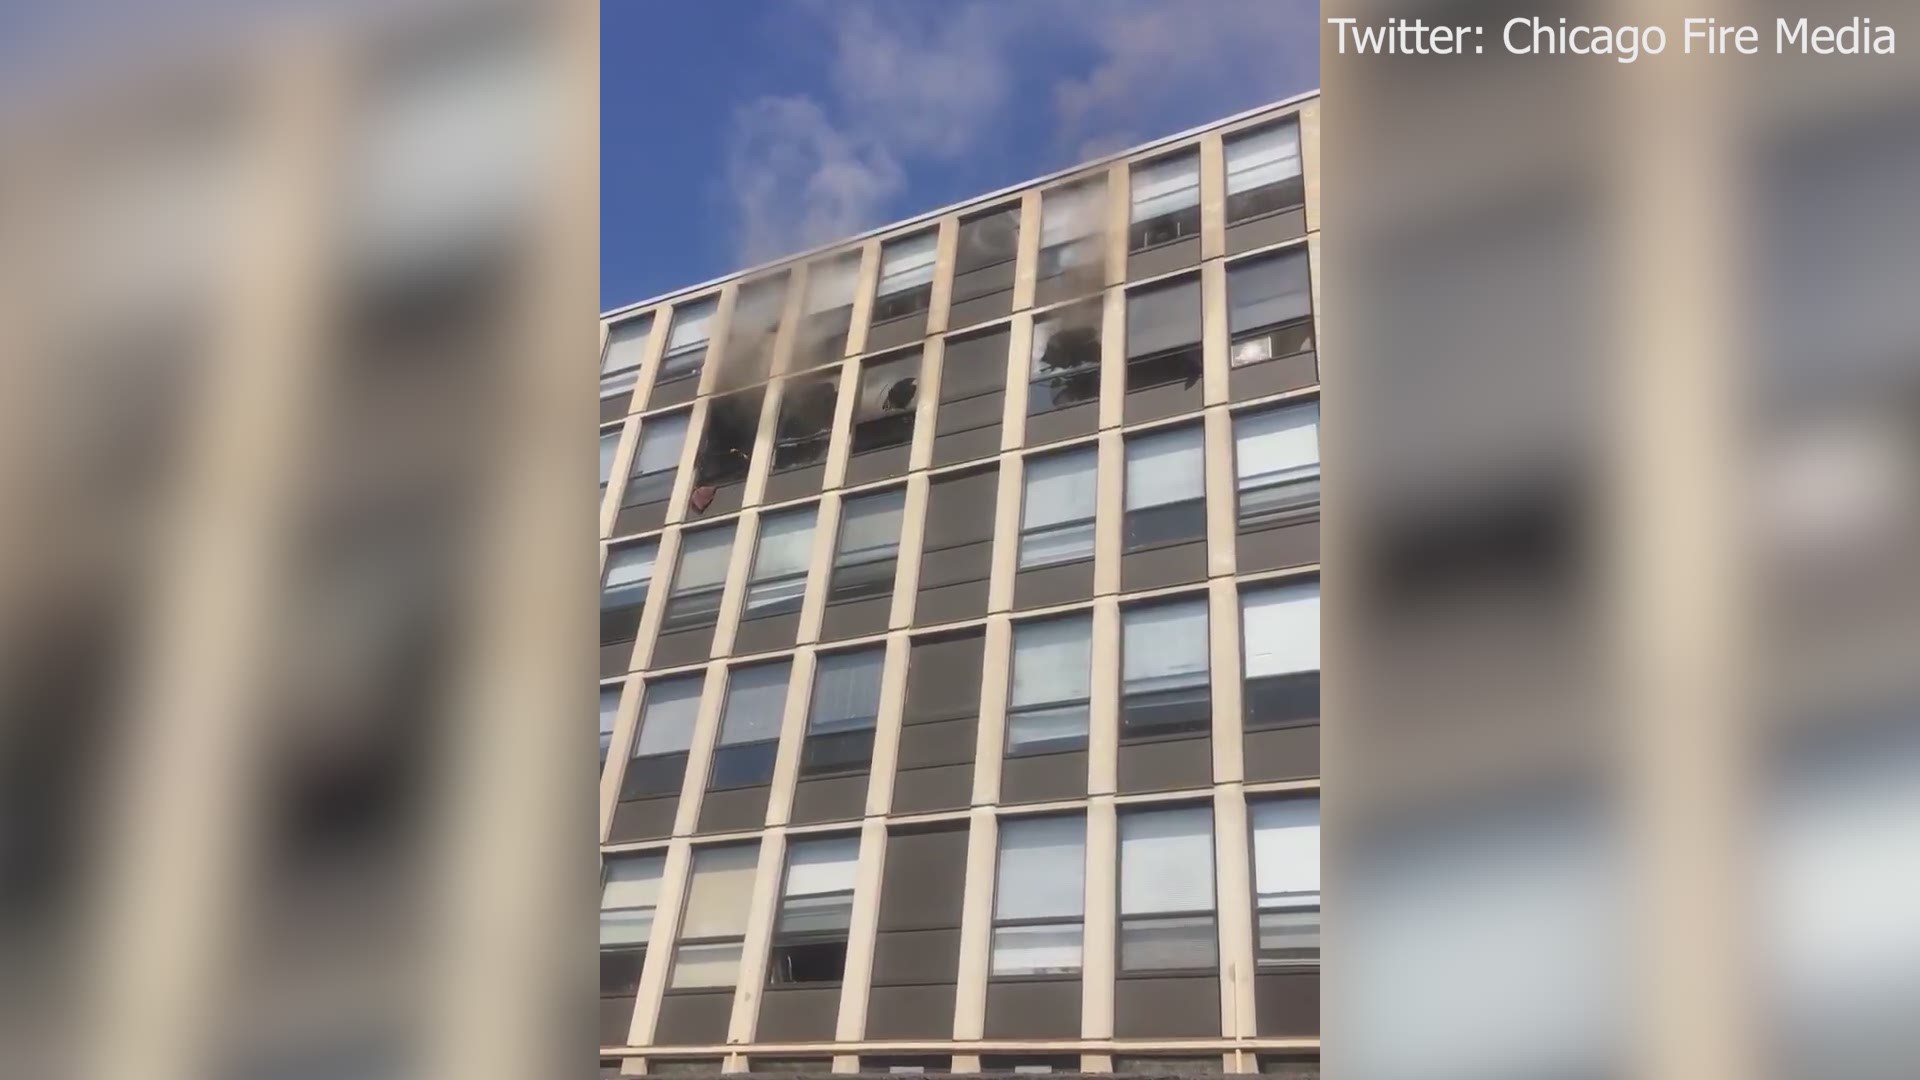 A Chicago cat may now have eight lives after jumping out of a fifth-floor window to escape an apartment fire. (Video: Chicago Fire Media Twitter)